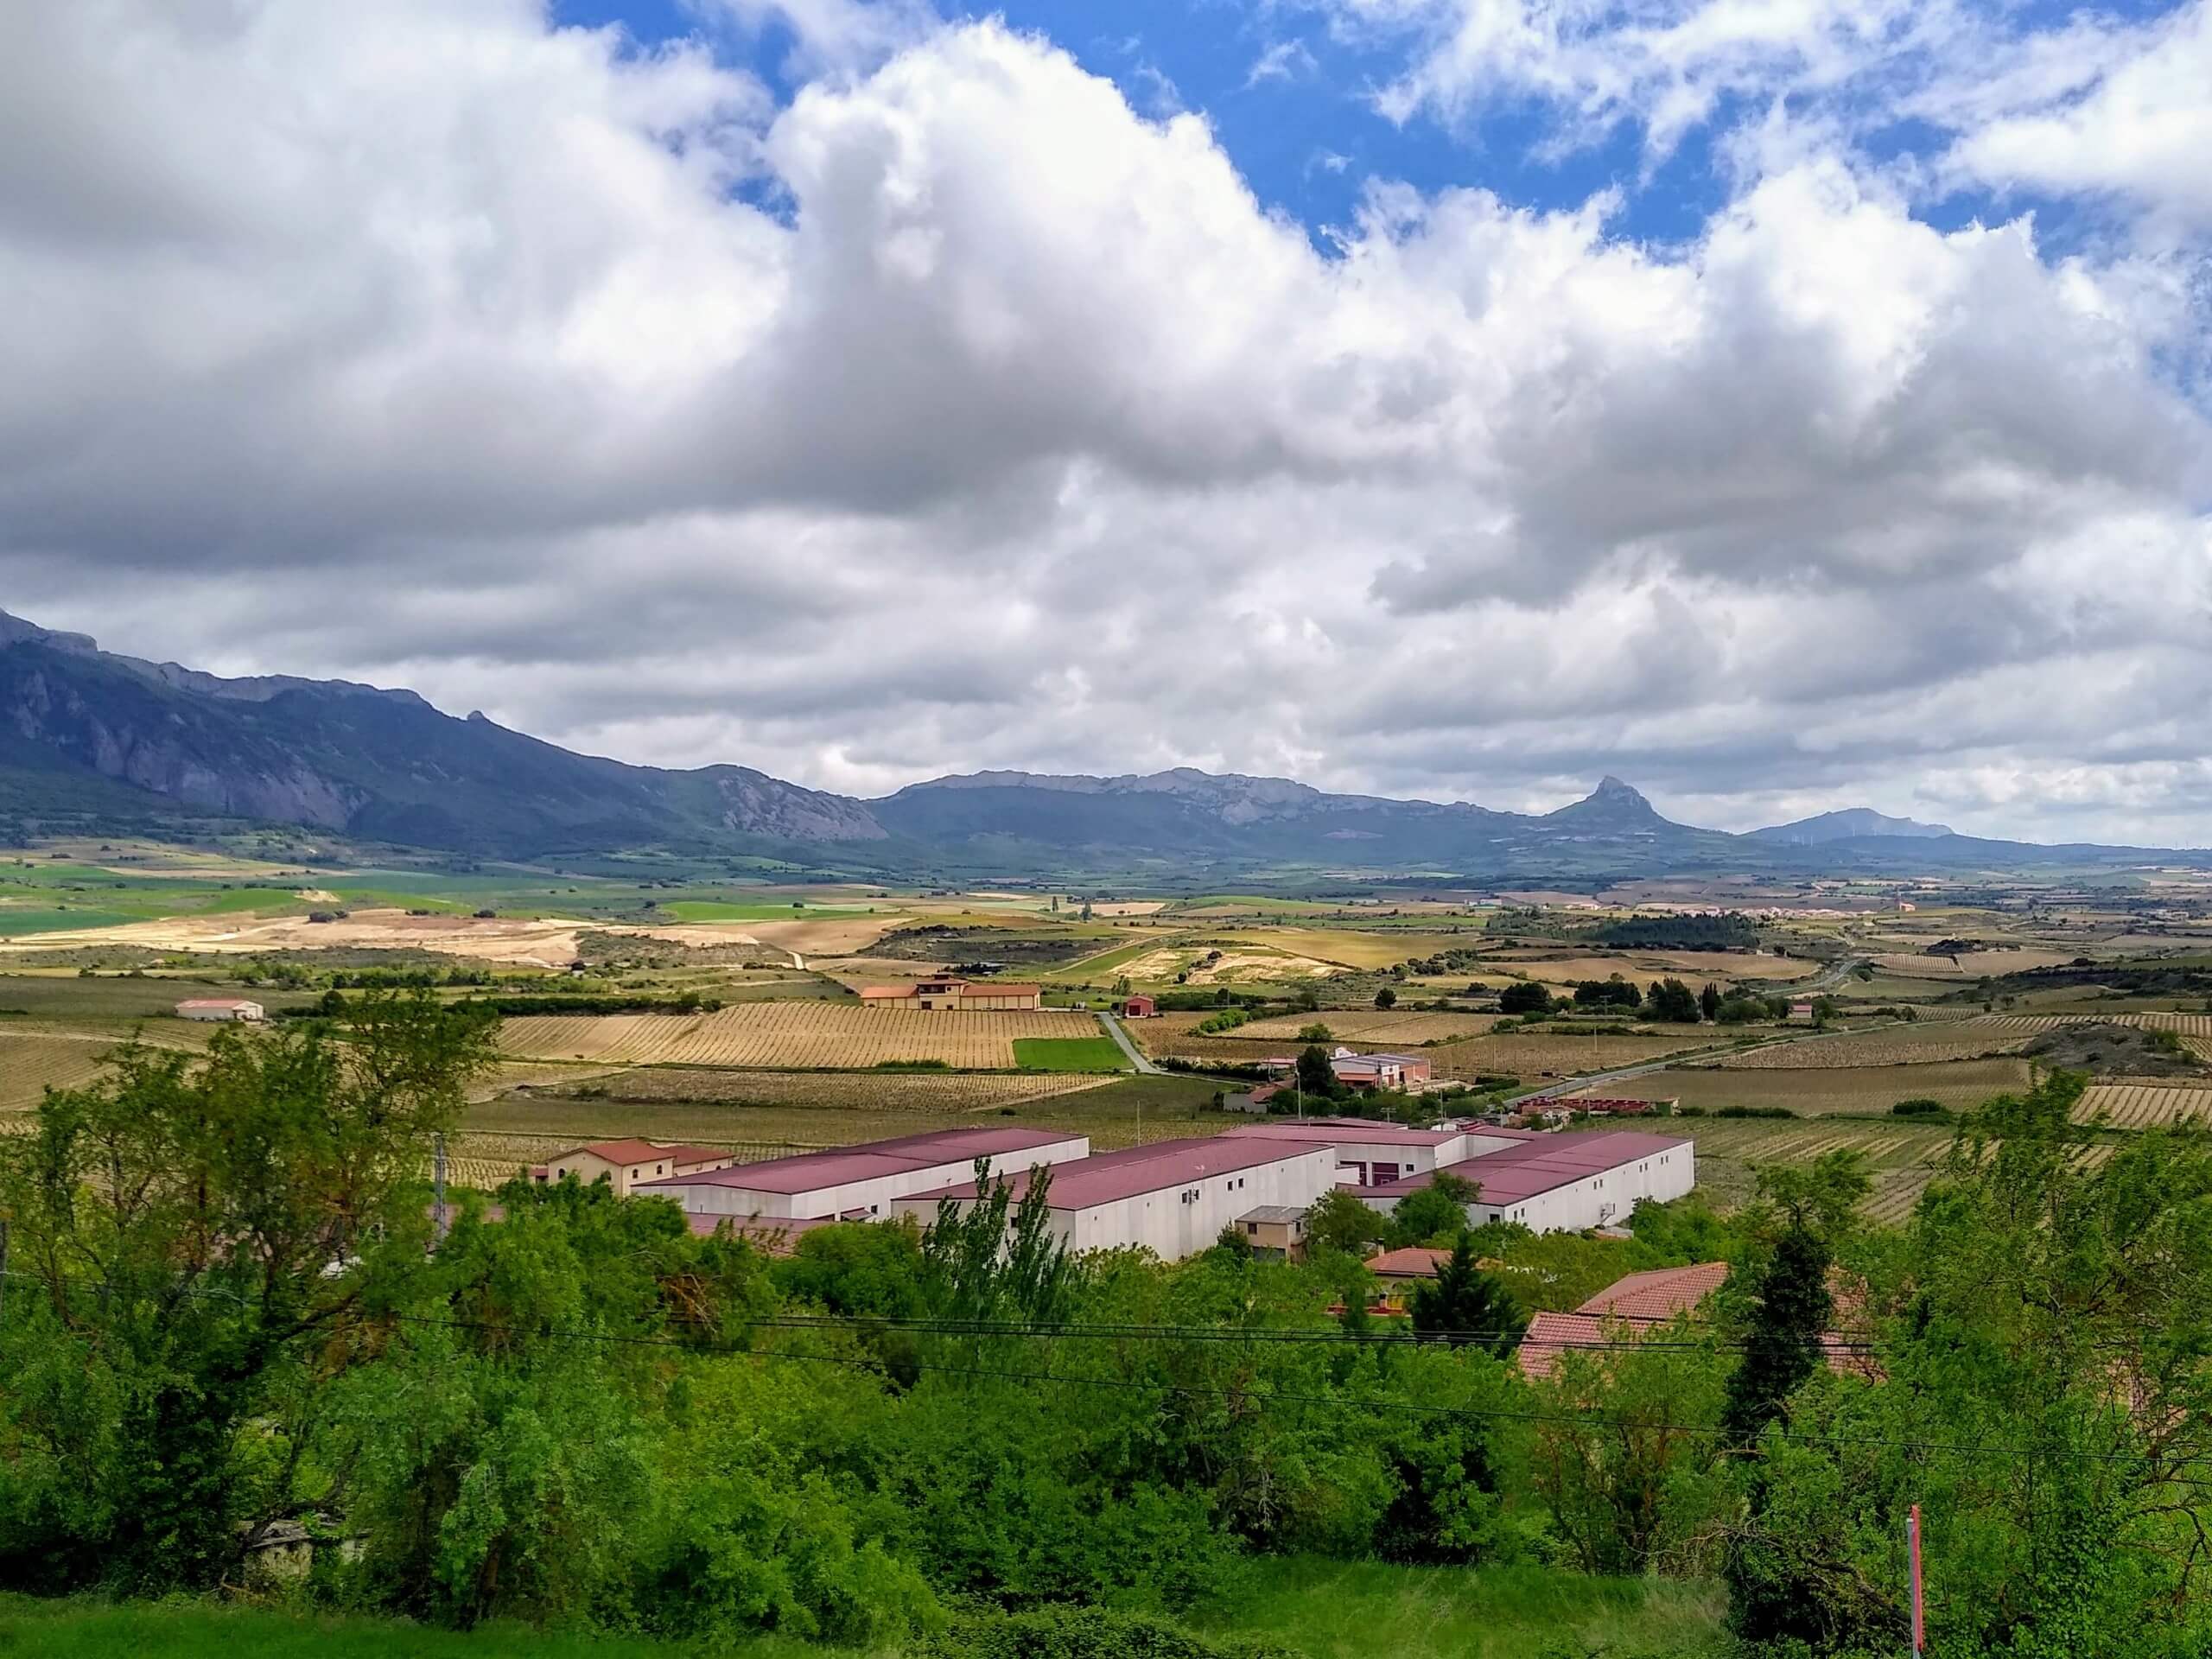 Mountains and pastures in Rioja